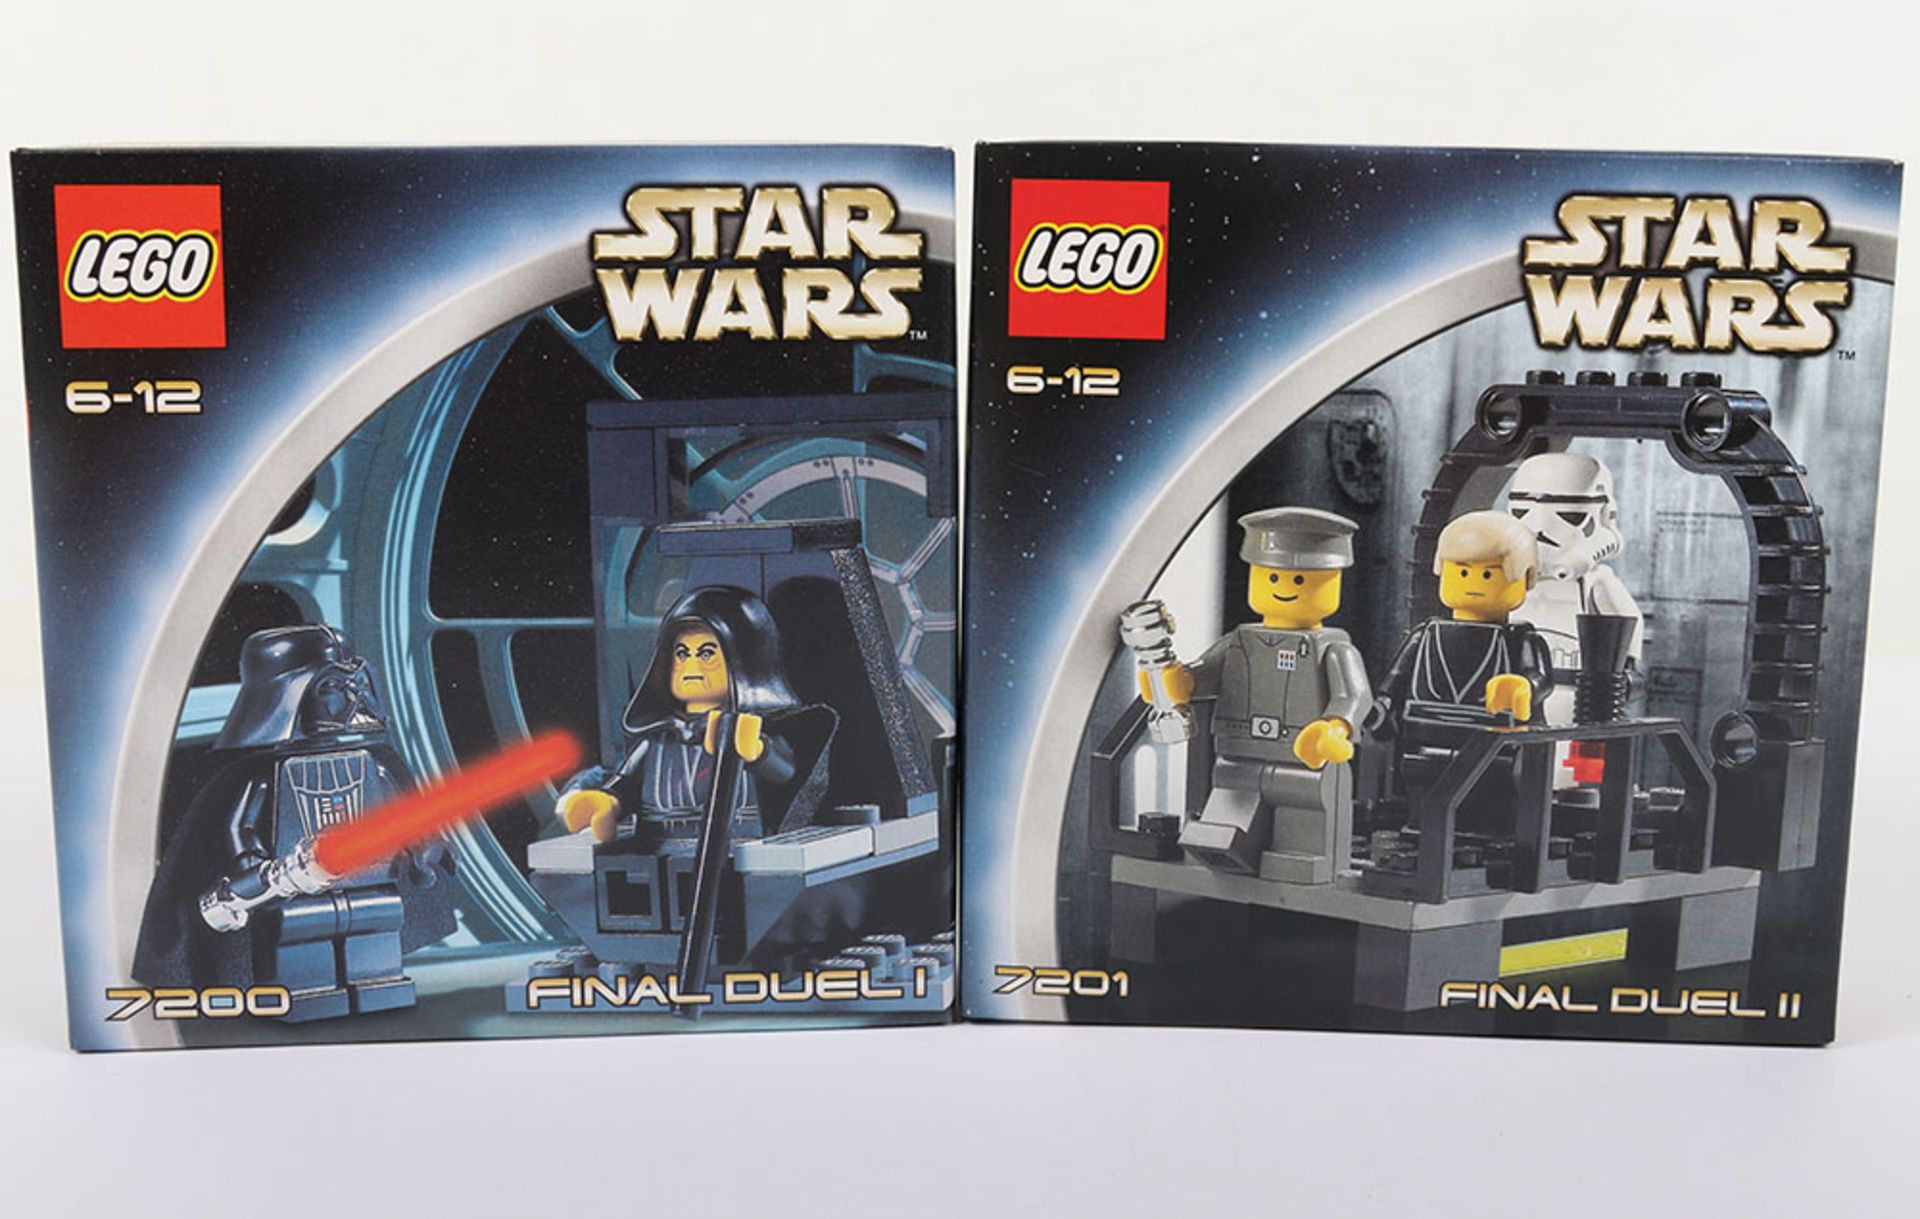 Two Mint Condition 2002 Lego Star Wars Sets